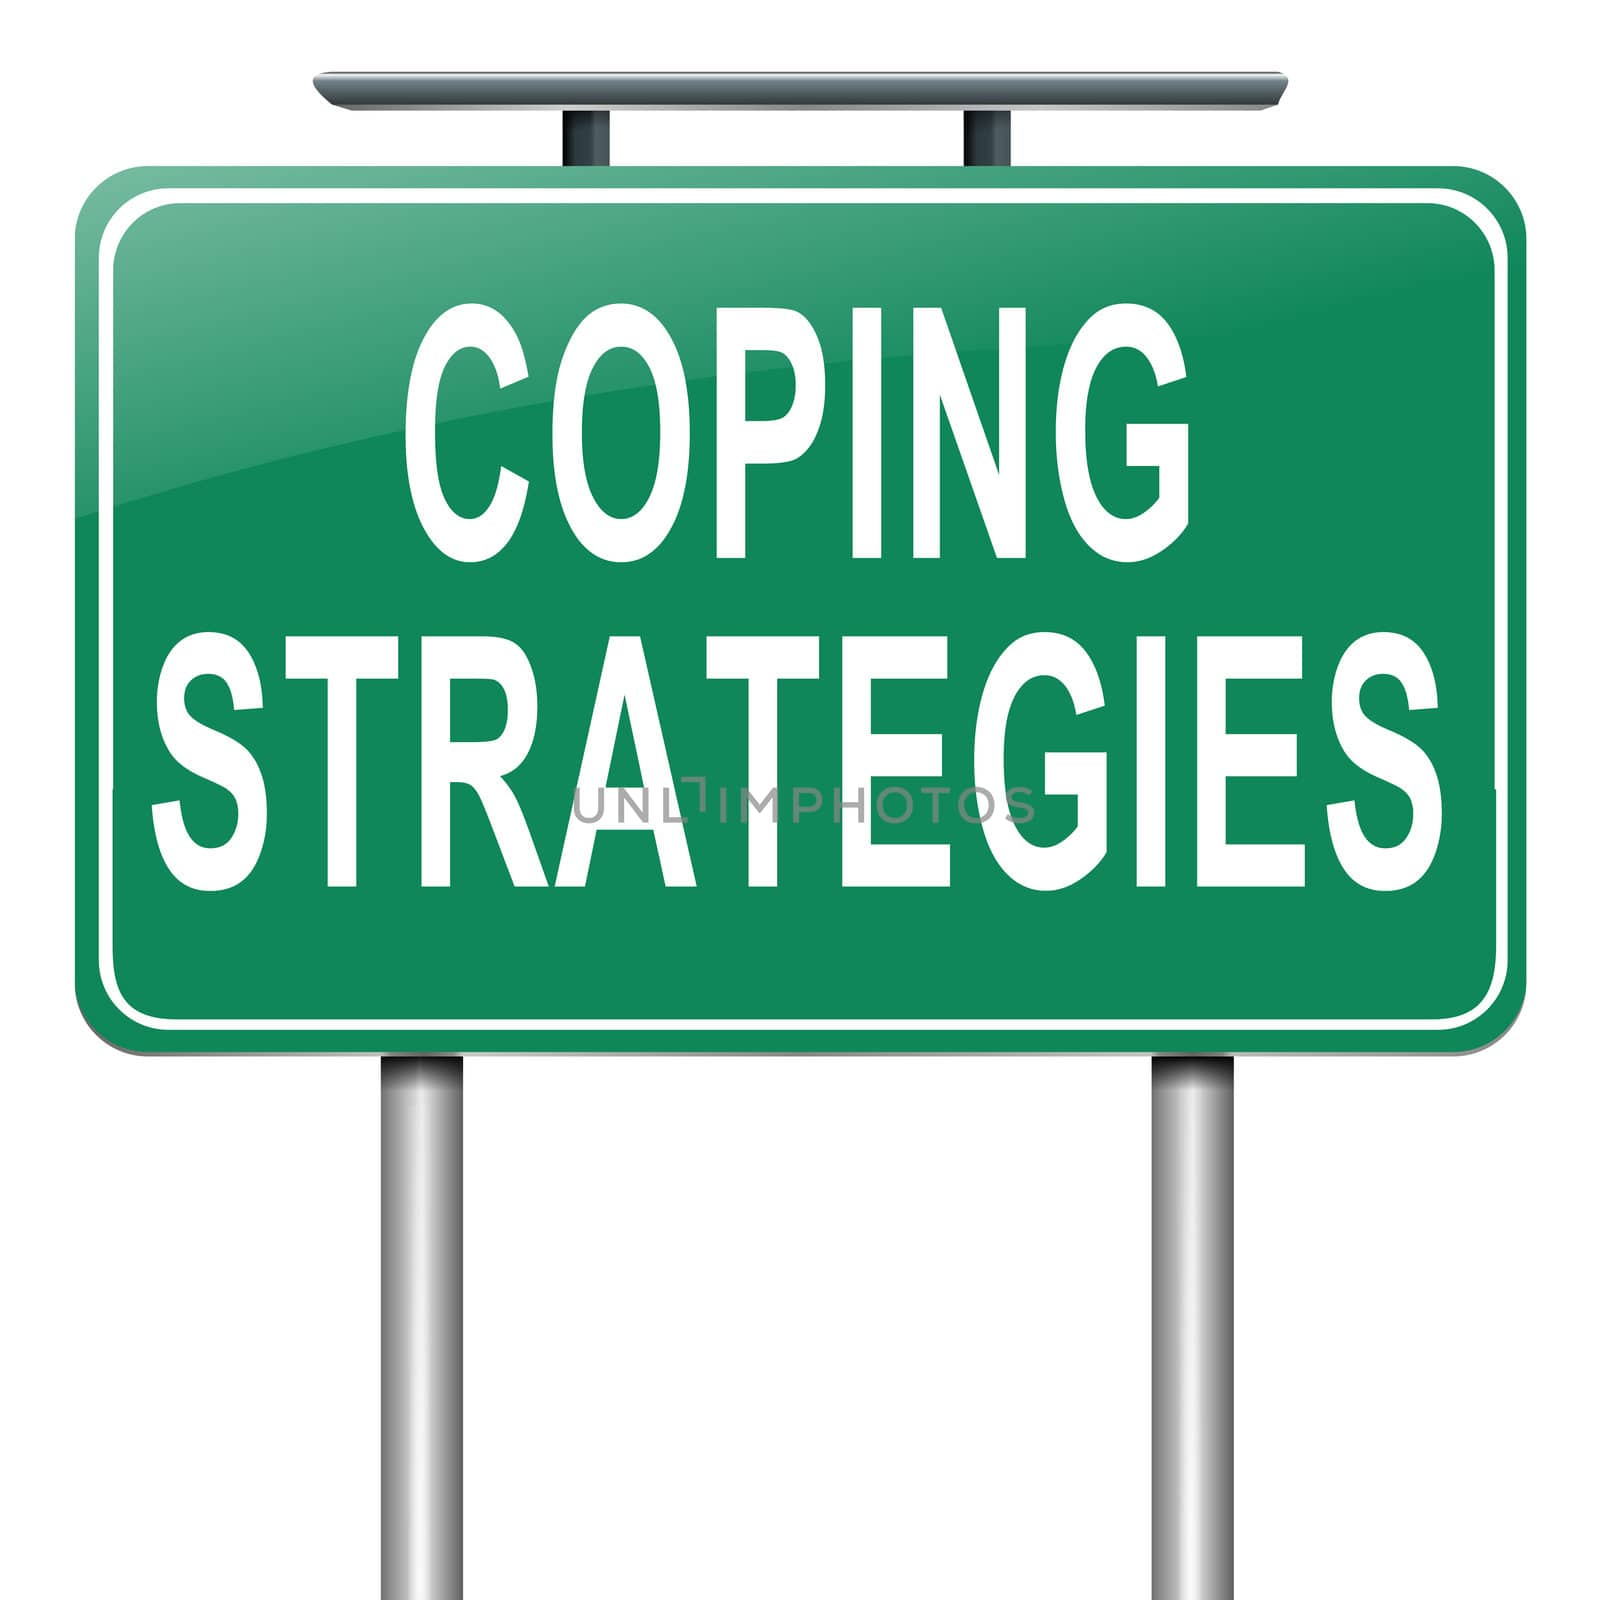 Coping strategies. by 72soul